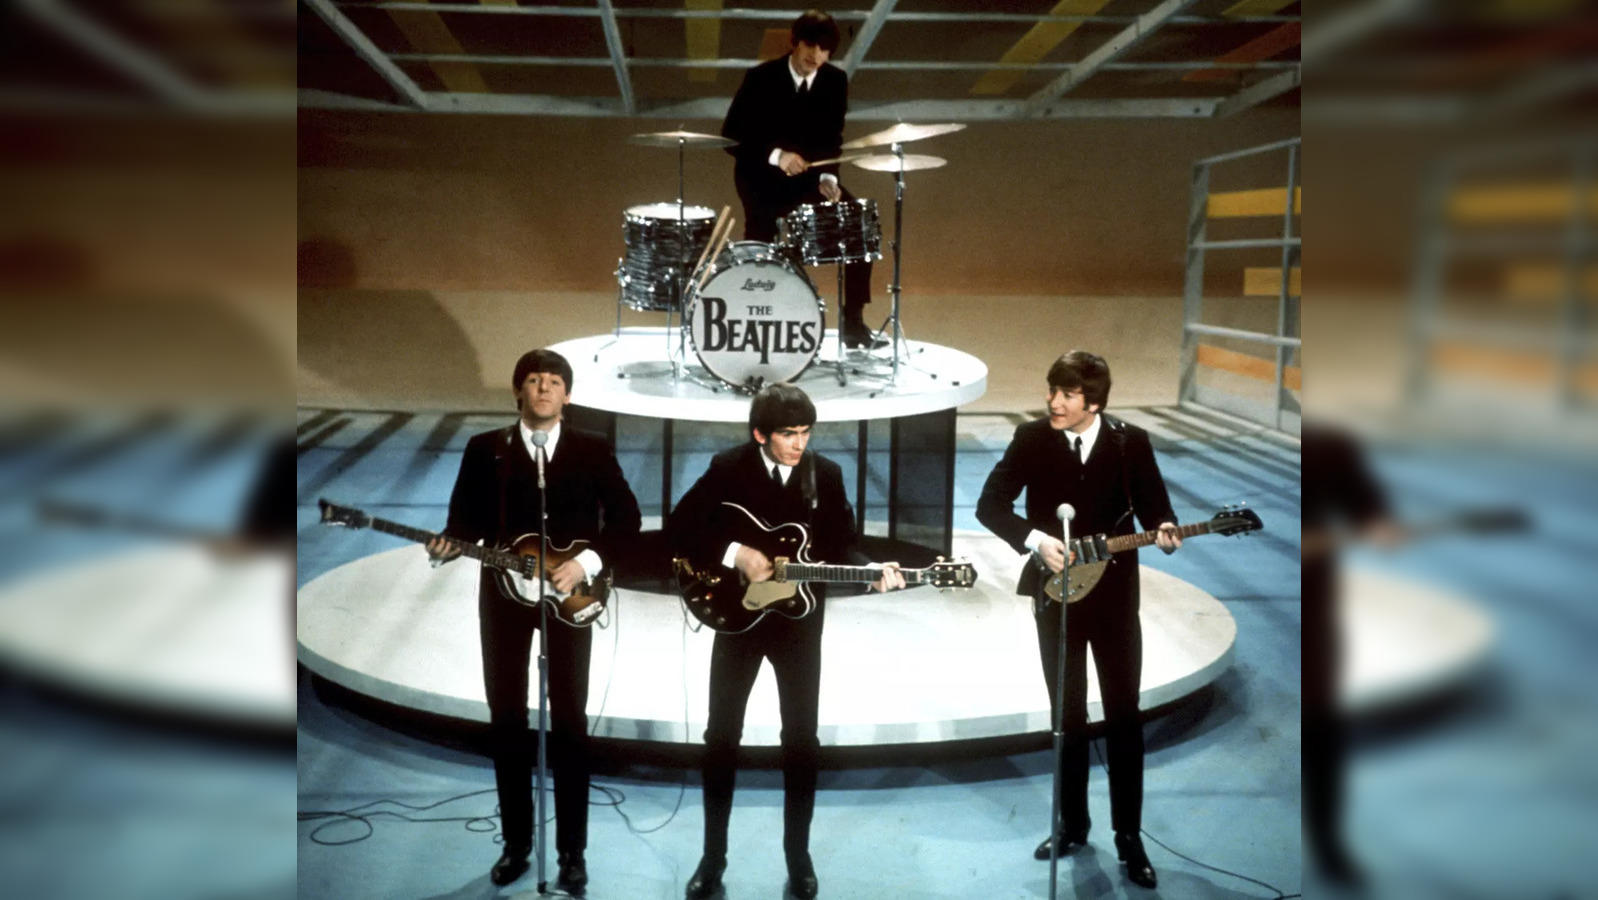 the beatles now and then: The Beatles' final song 'Now And Then